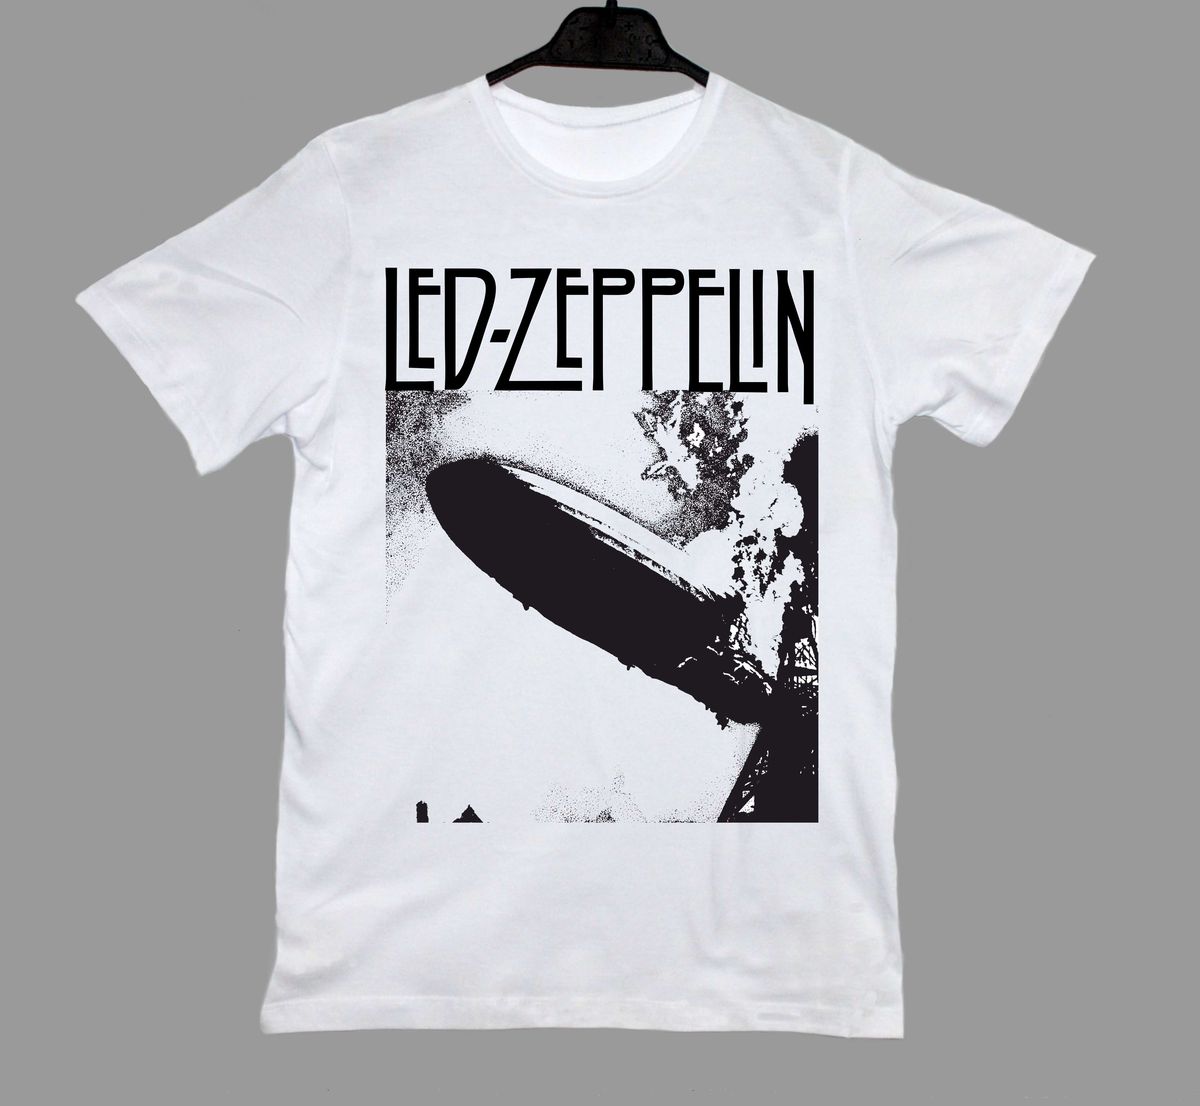 Led Zeppelin T Shirt / Led Zeppelin t-shirt size M - RoxxBKK : Shipped directly to your home 